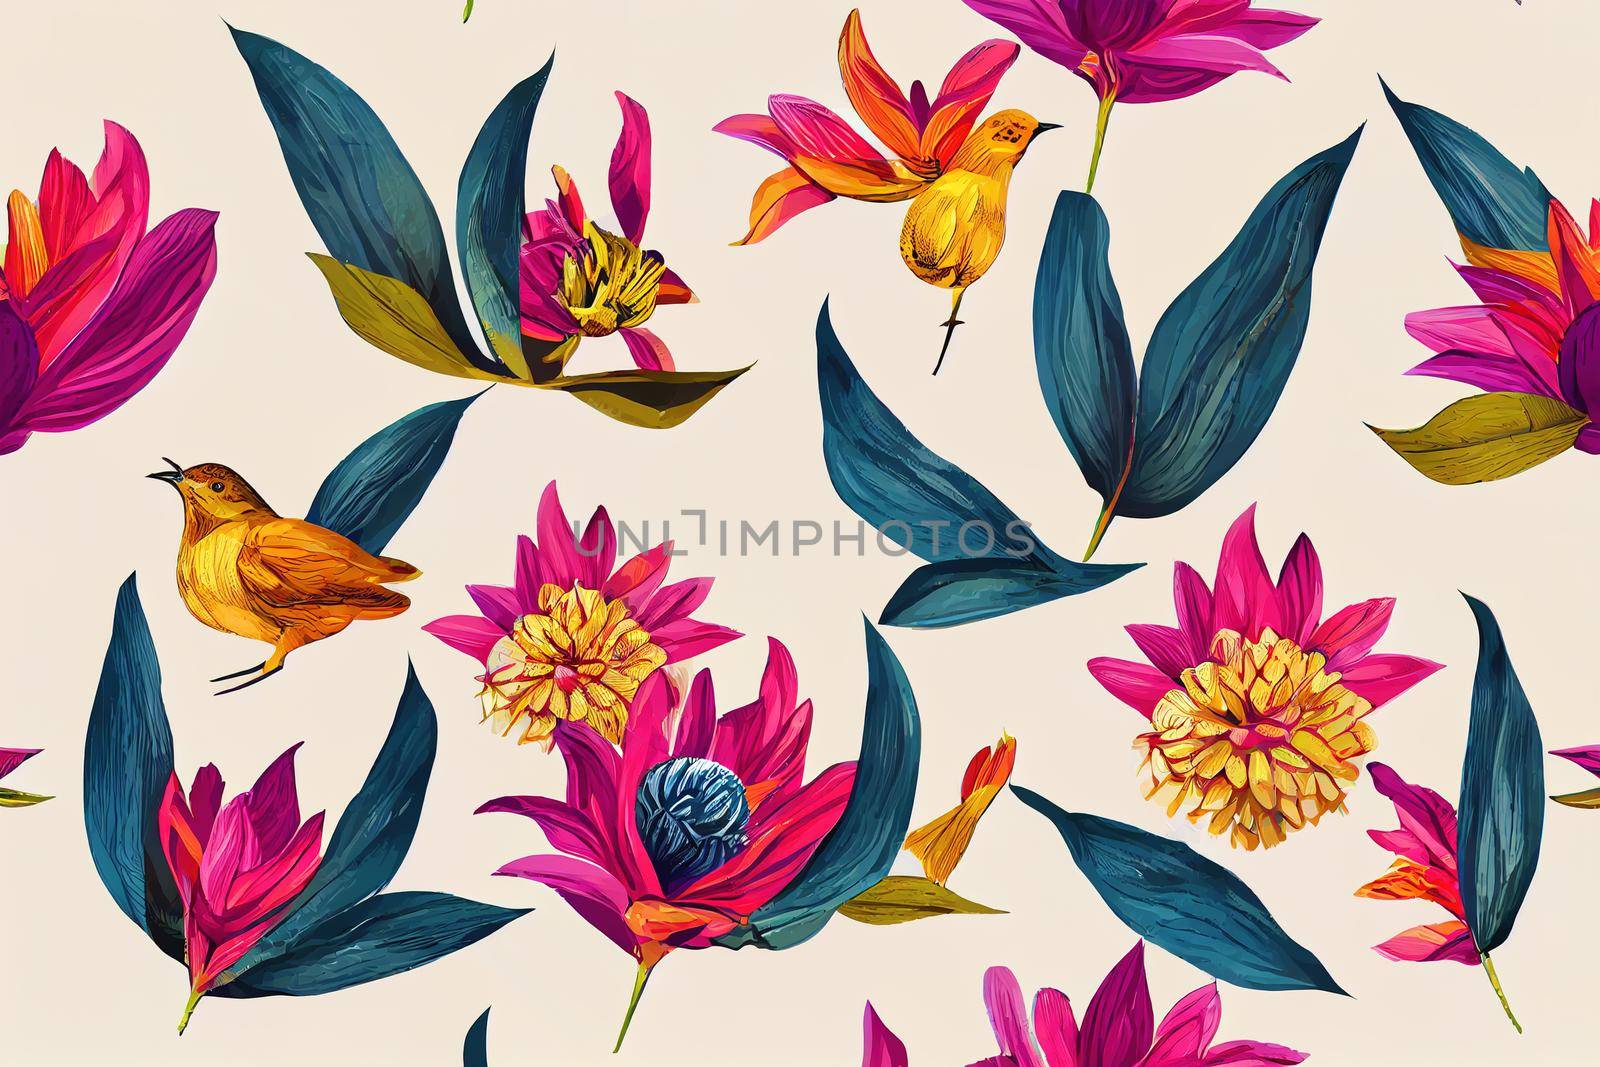 Collage style pattern design. Hand-sketched bird on dahlia flower. Trendy background with botanical, geometric shapes, and abstract element